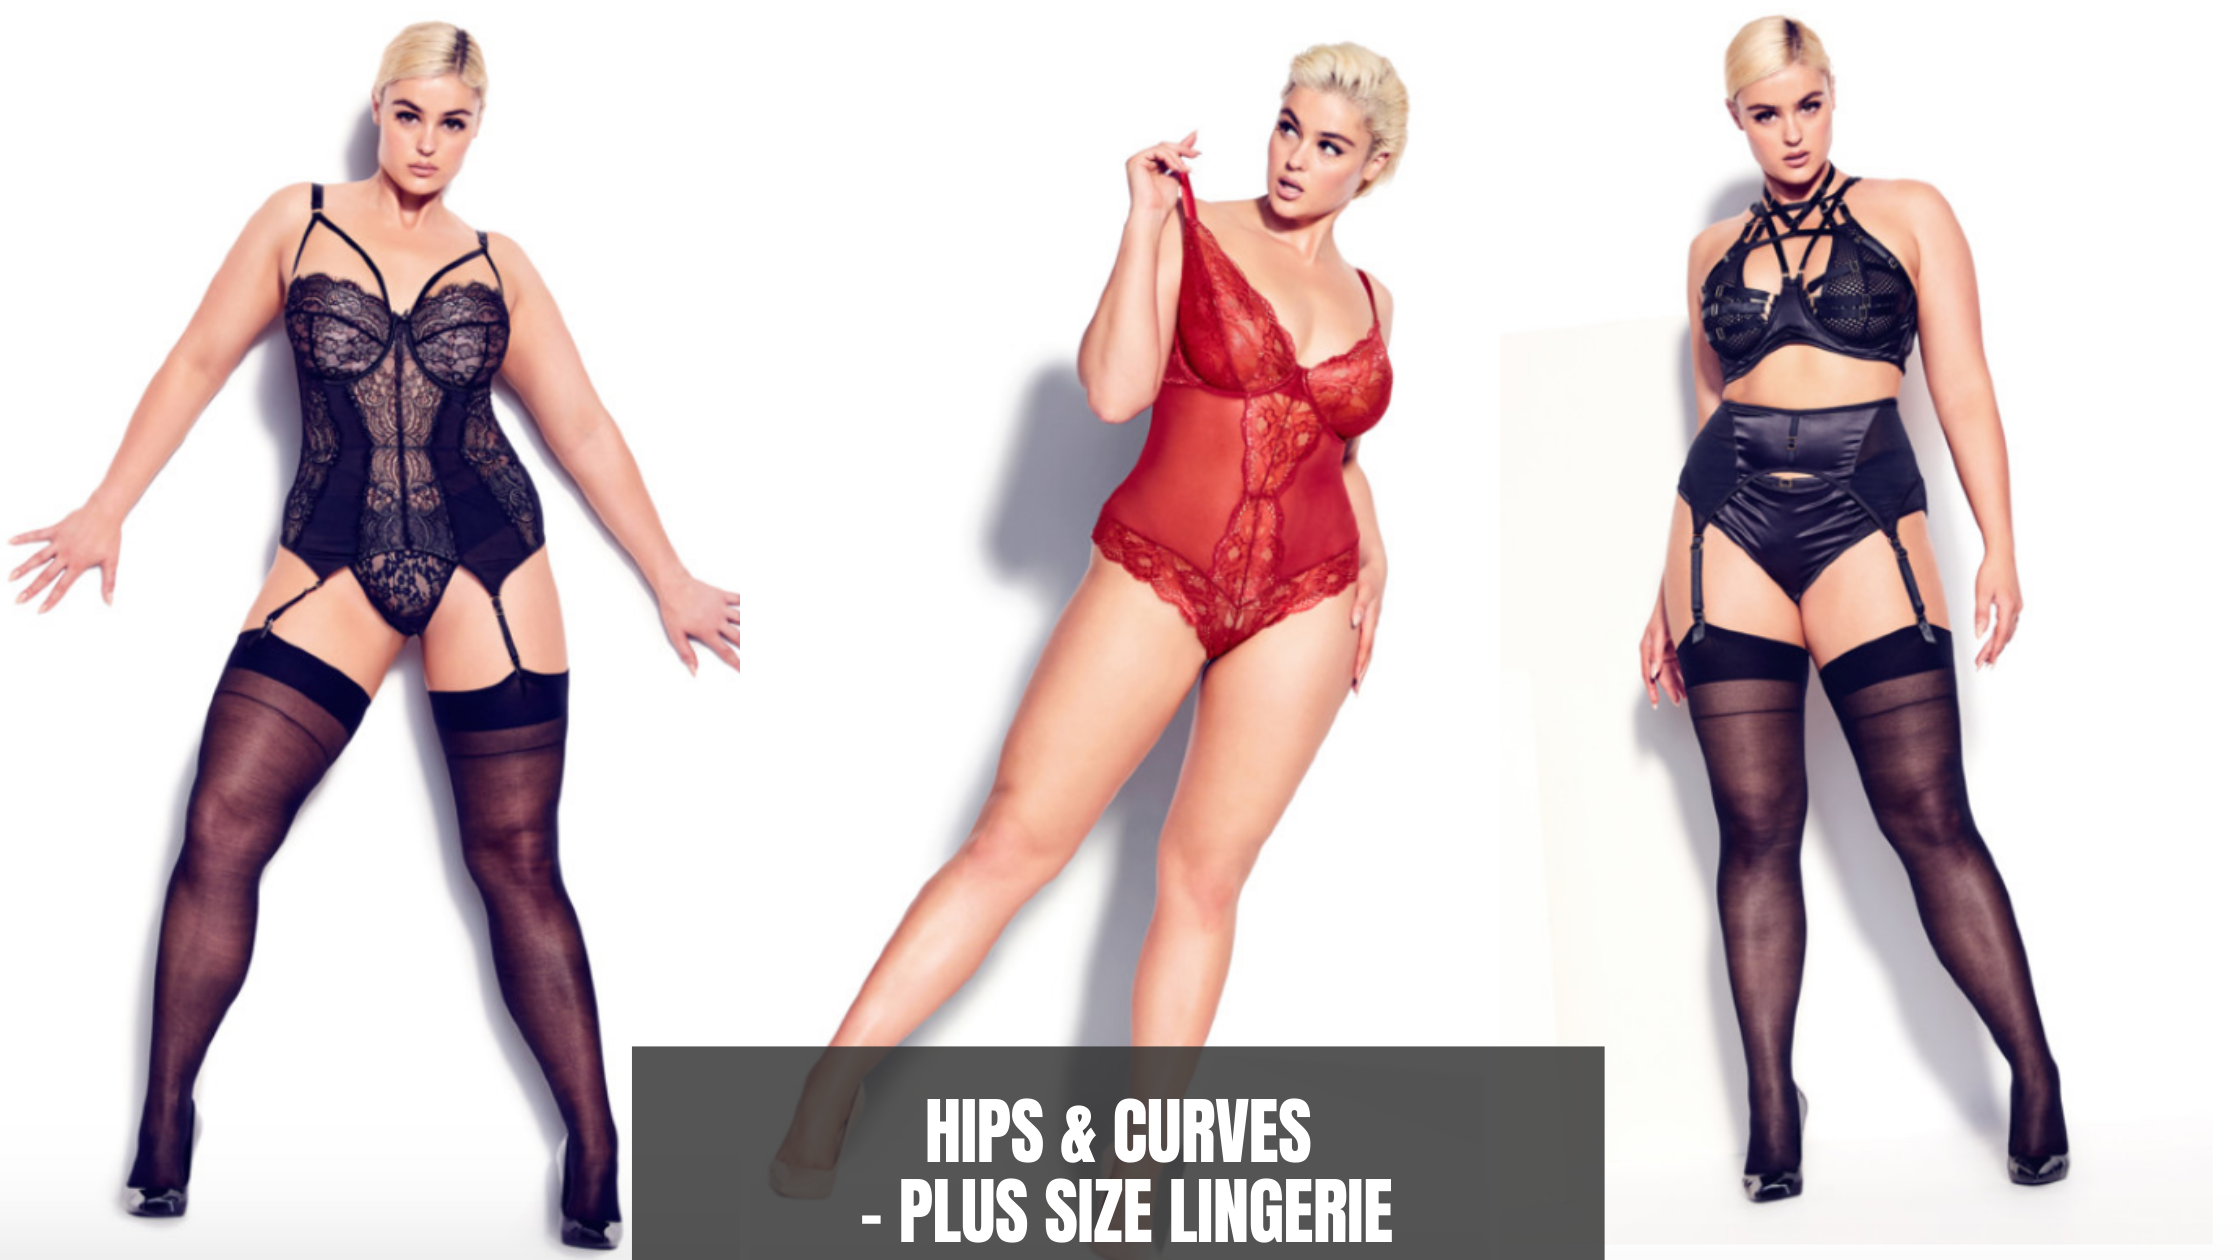 where to buy plus size lingerie - Hips & Curves